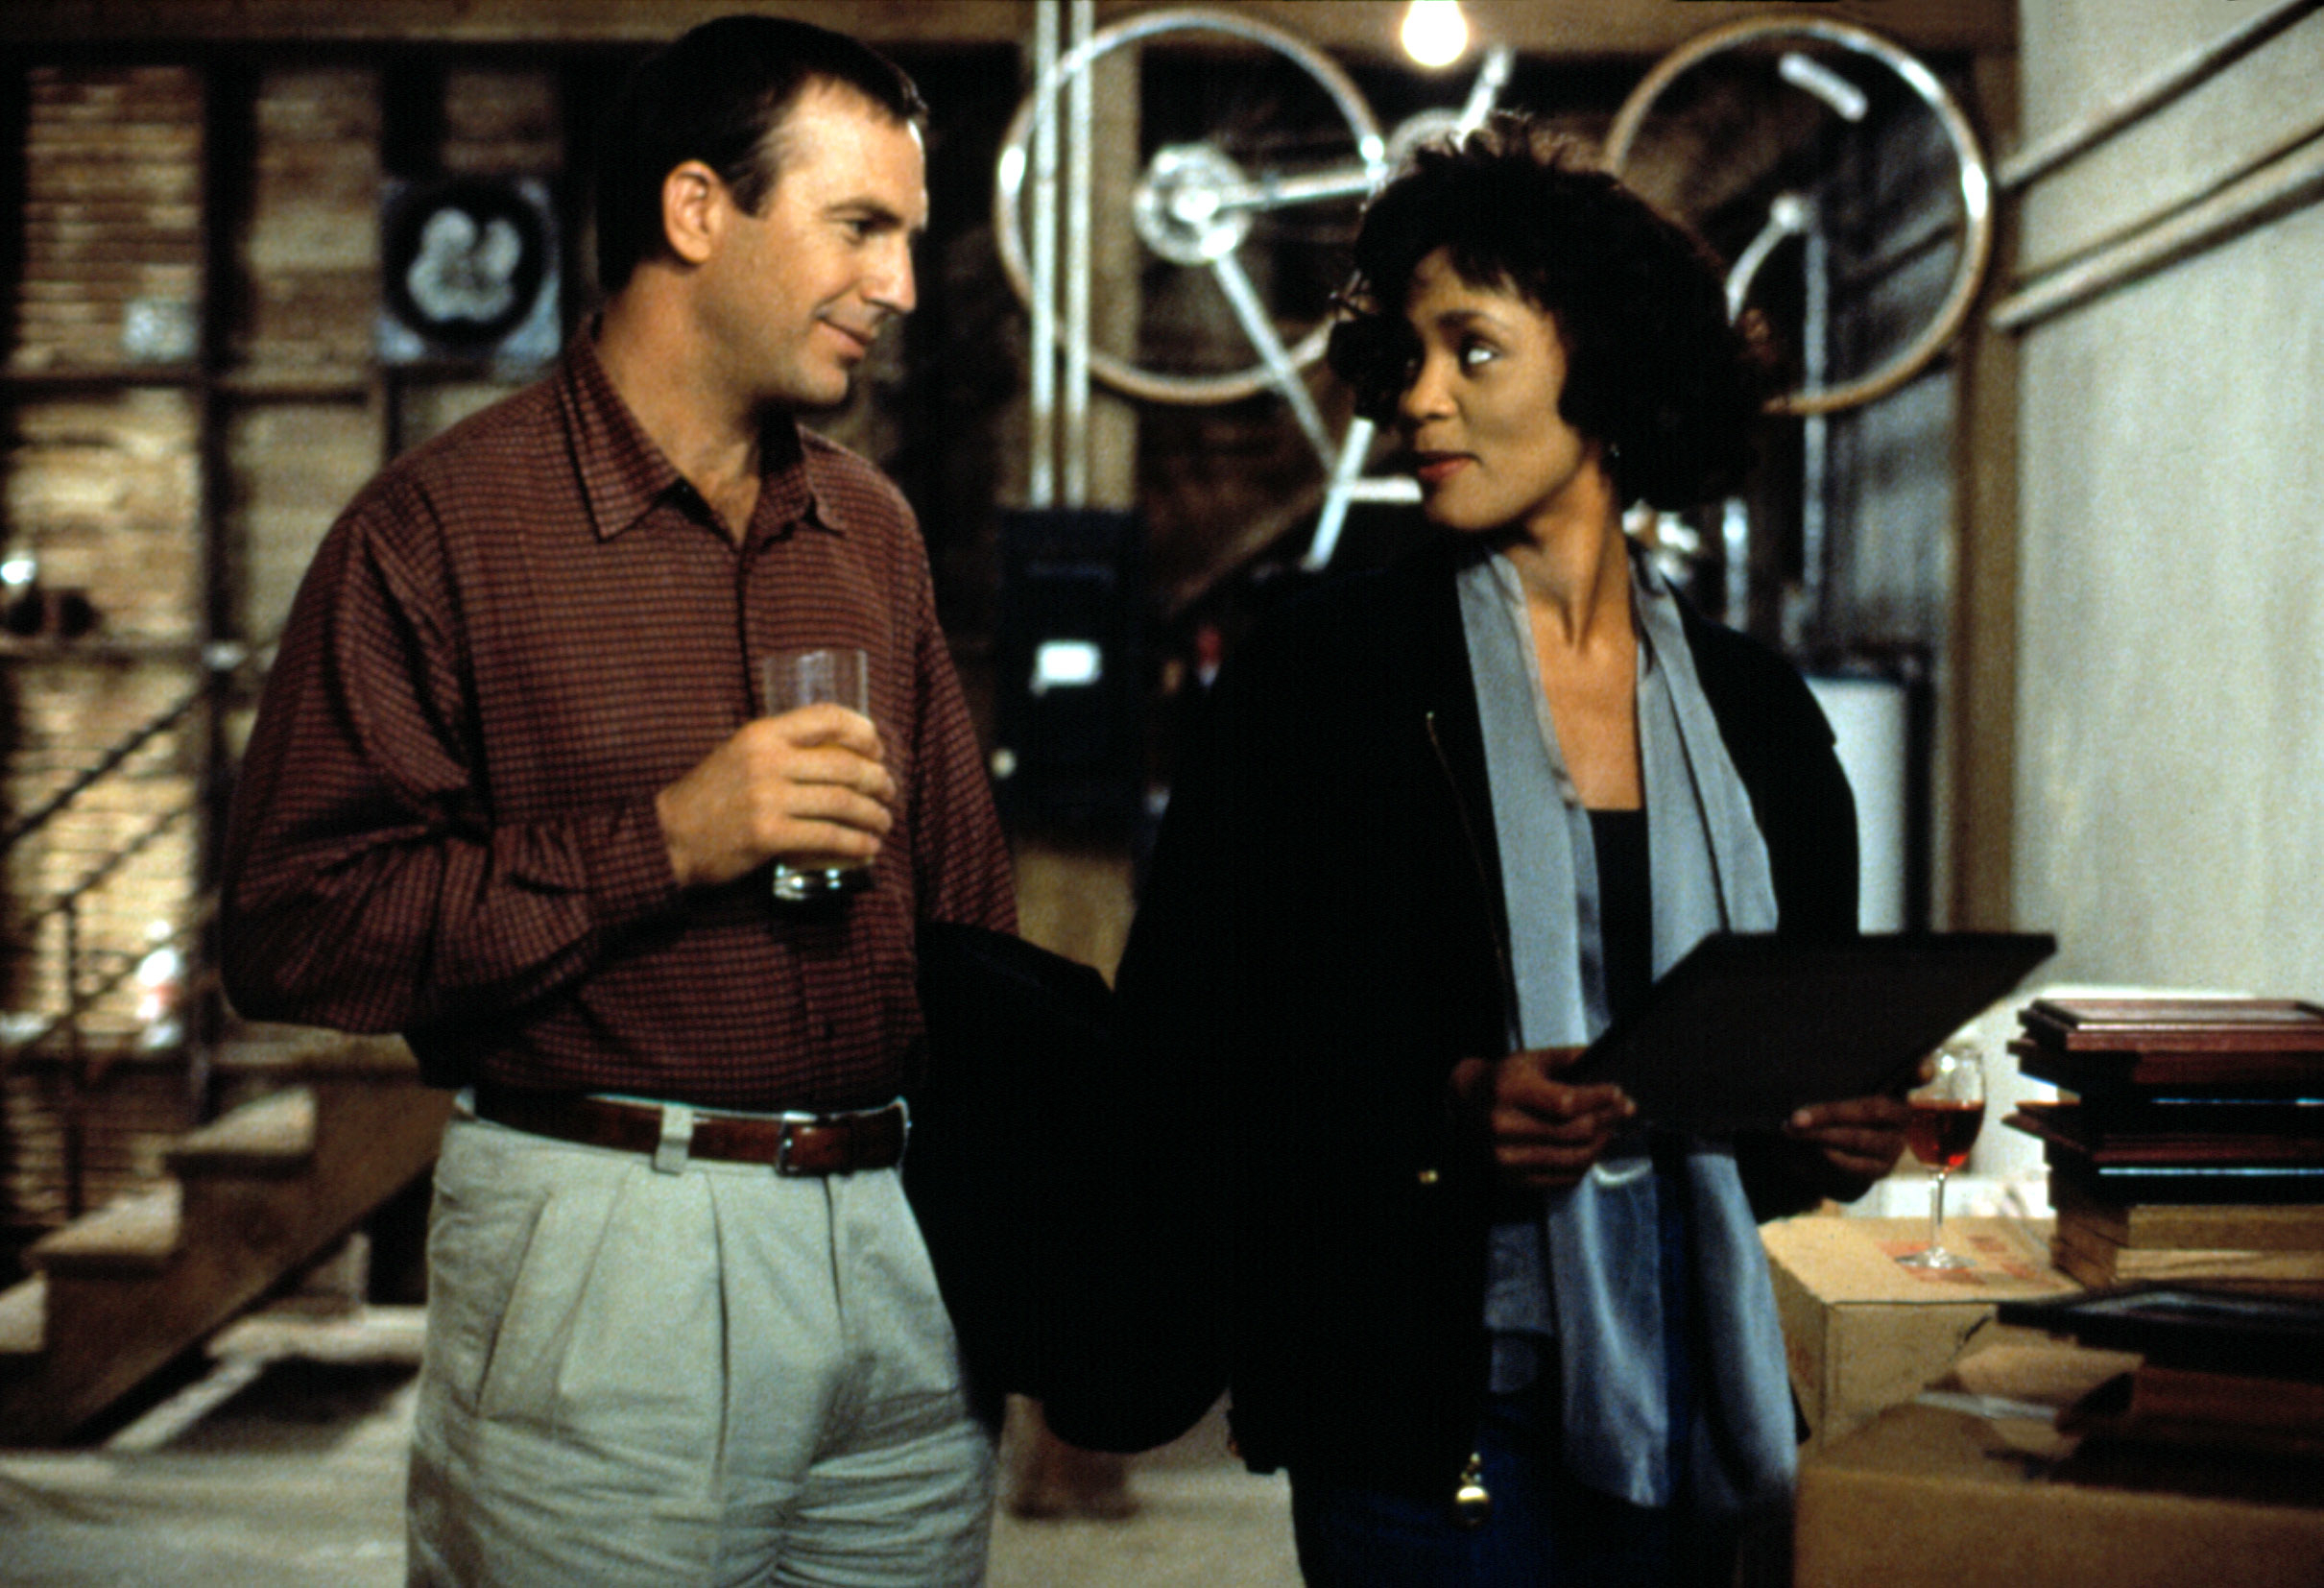 Kevin Costner and Whitney Houston in a film scene, with Costner holding a drink and Houston holding a folder, standing in a room with industrial decor